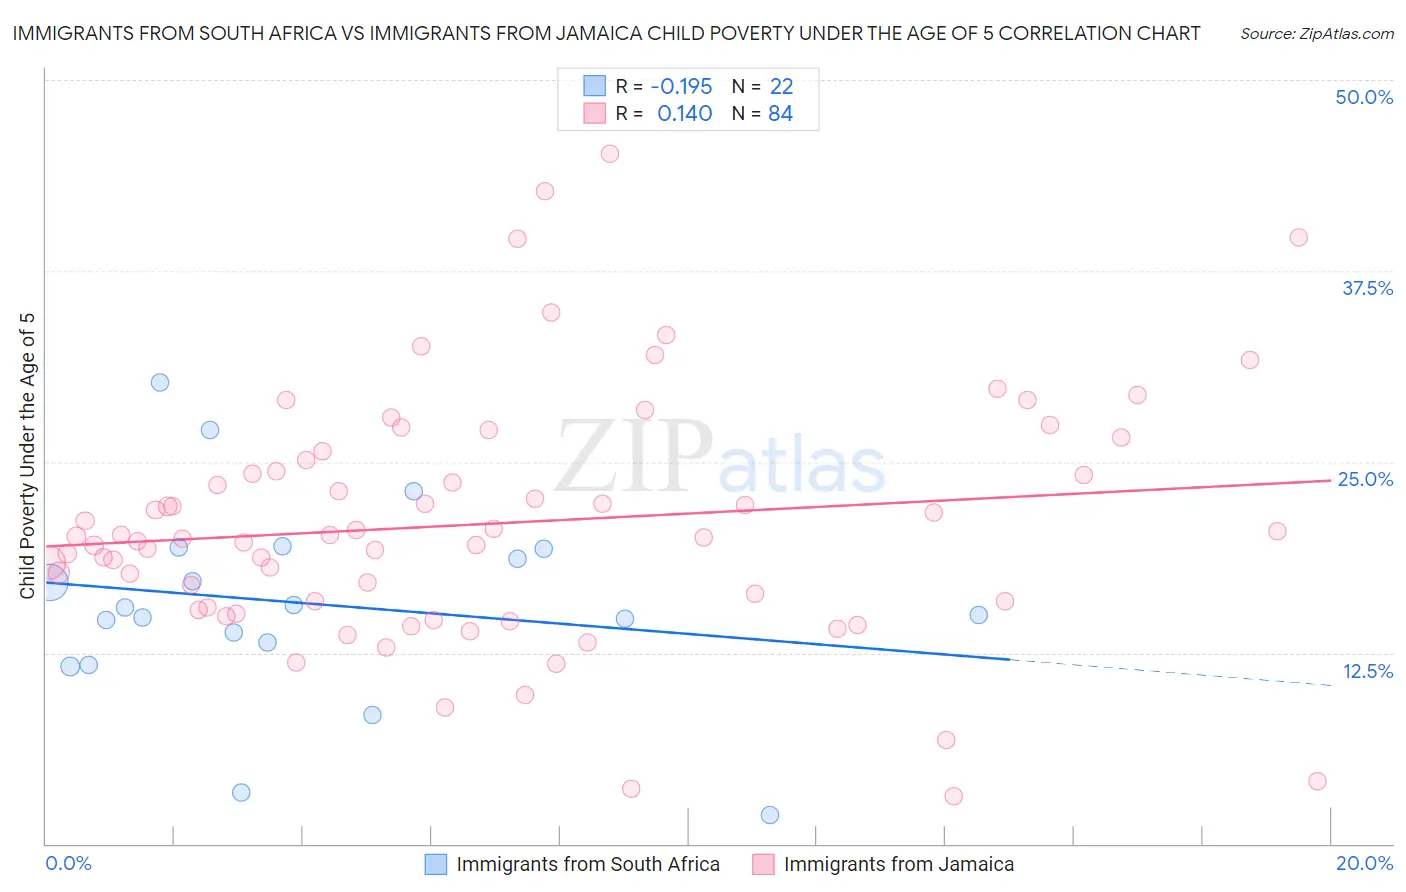 Immigrants from South Africa vs Immigrants from Jamaica Child Poverty Under the Age of 5